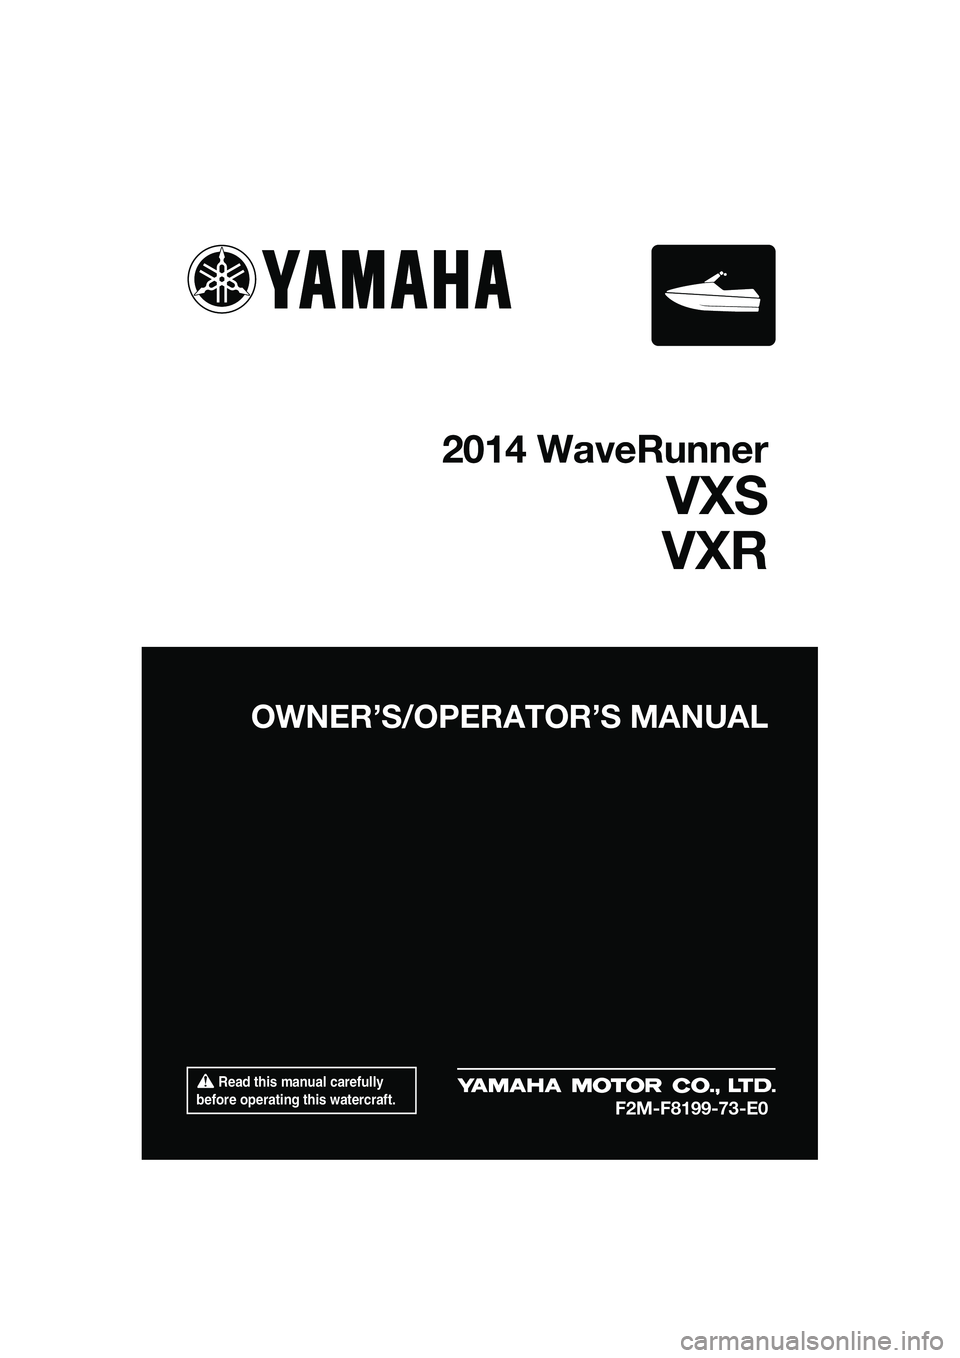 YAMAHA VXR 2014  Owners Manual  Read this manual carefully 
before operating this watercraft.
OWNER’S/OPERAT OR’S MANUAL
2014 WaveRunner
VXS
VXR
F2M-F8199-73-E0
UF2M73E0.book  Page 1  Friday, August 2, 2013  11:28 AM 